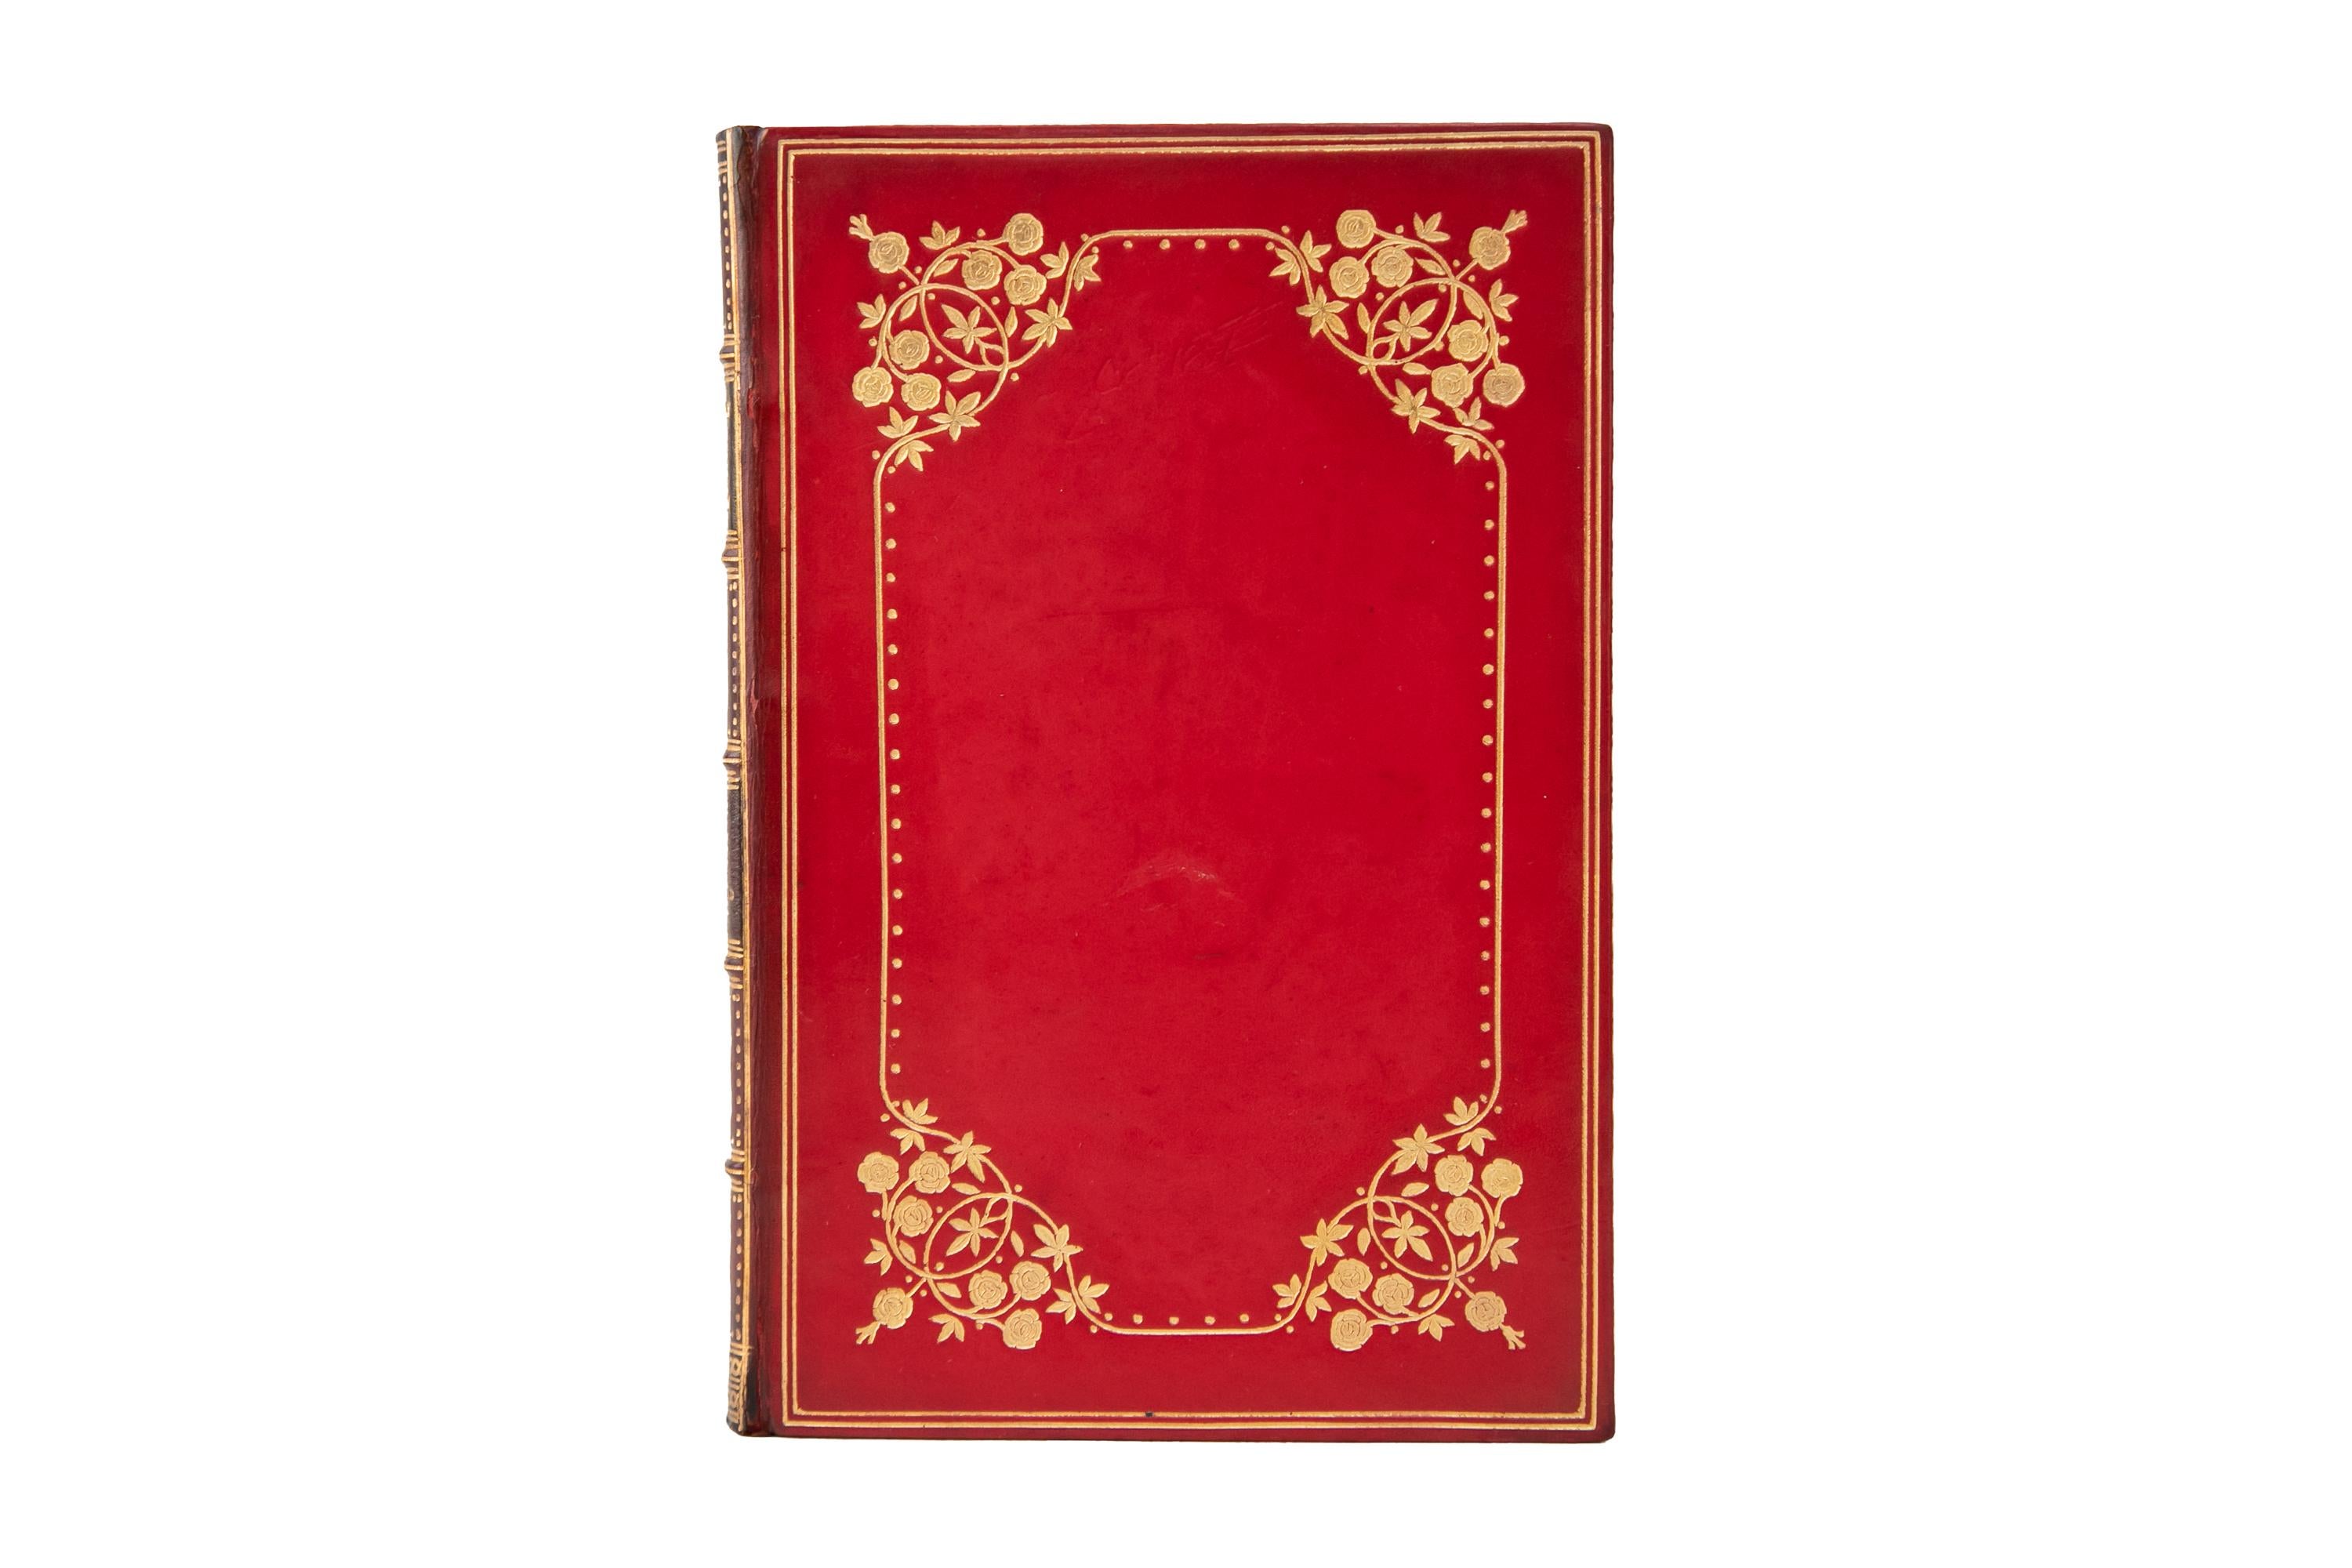 1 Volume. Edward Fitzgerald, Rubáiyát of Omar Khayyám. Bound in full red calf with the covers displaying an ornate floral gilt-tooled border. The spine displays raised bands and ornate gilt-tooled detailing with green and brown morocco labels. All